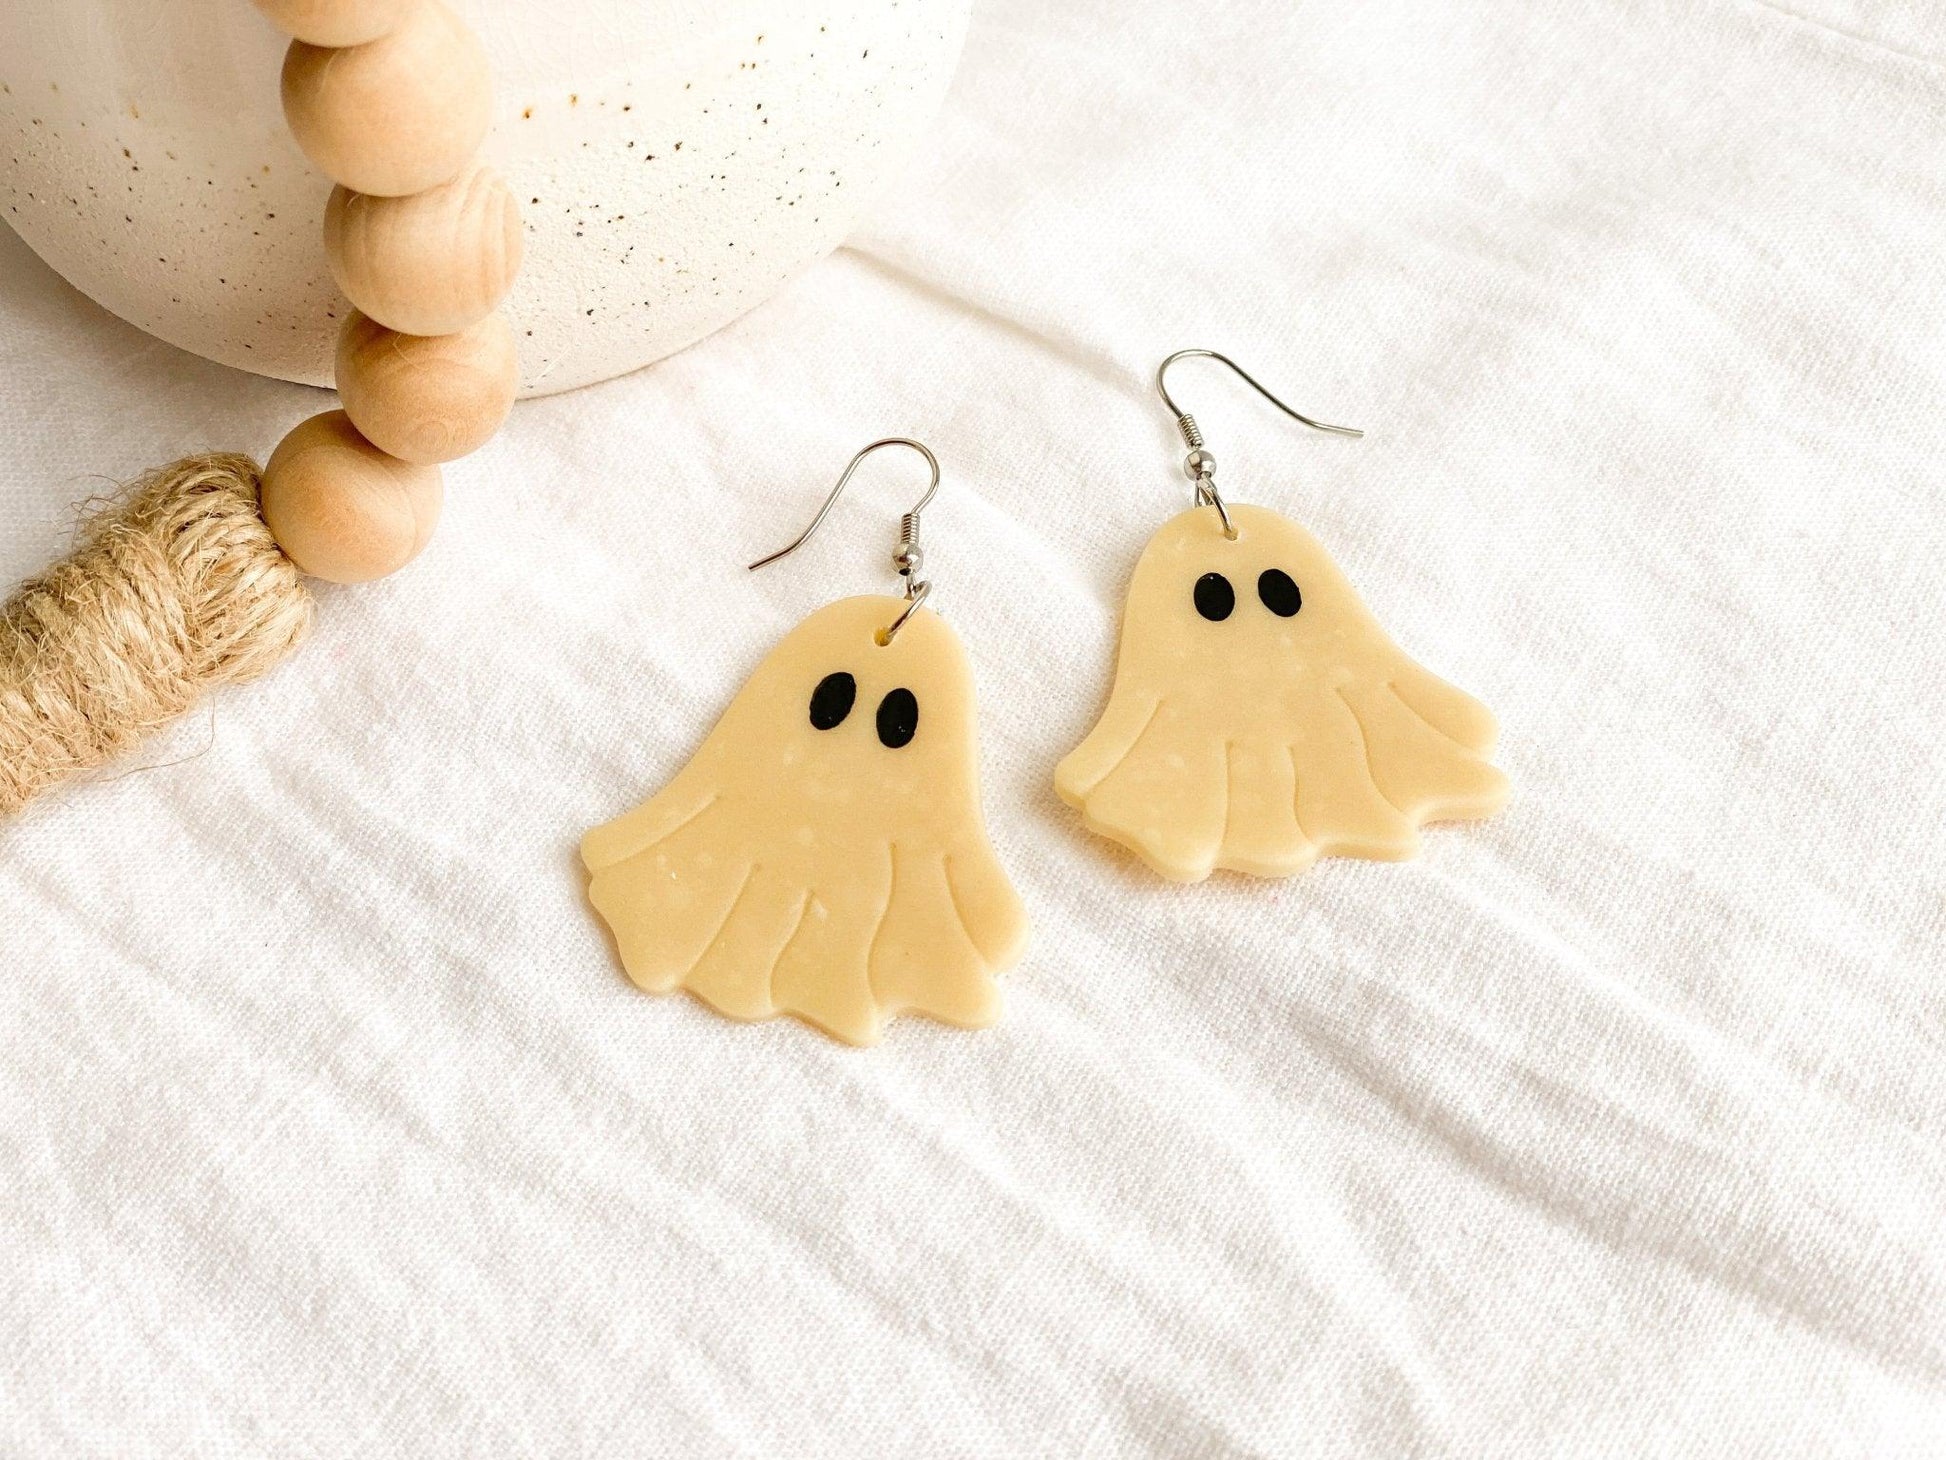 Ghost Dangle Earrings - Halloween Jewelry - Sparkly Earrings - Fun Gift for Teacher - Birthday Gift for Friend - Glow in the Dark - Harbor to Gulf Co.